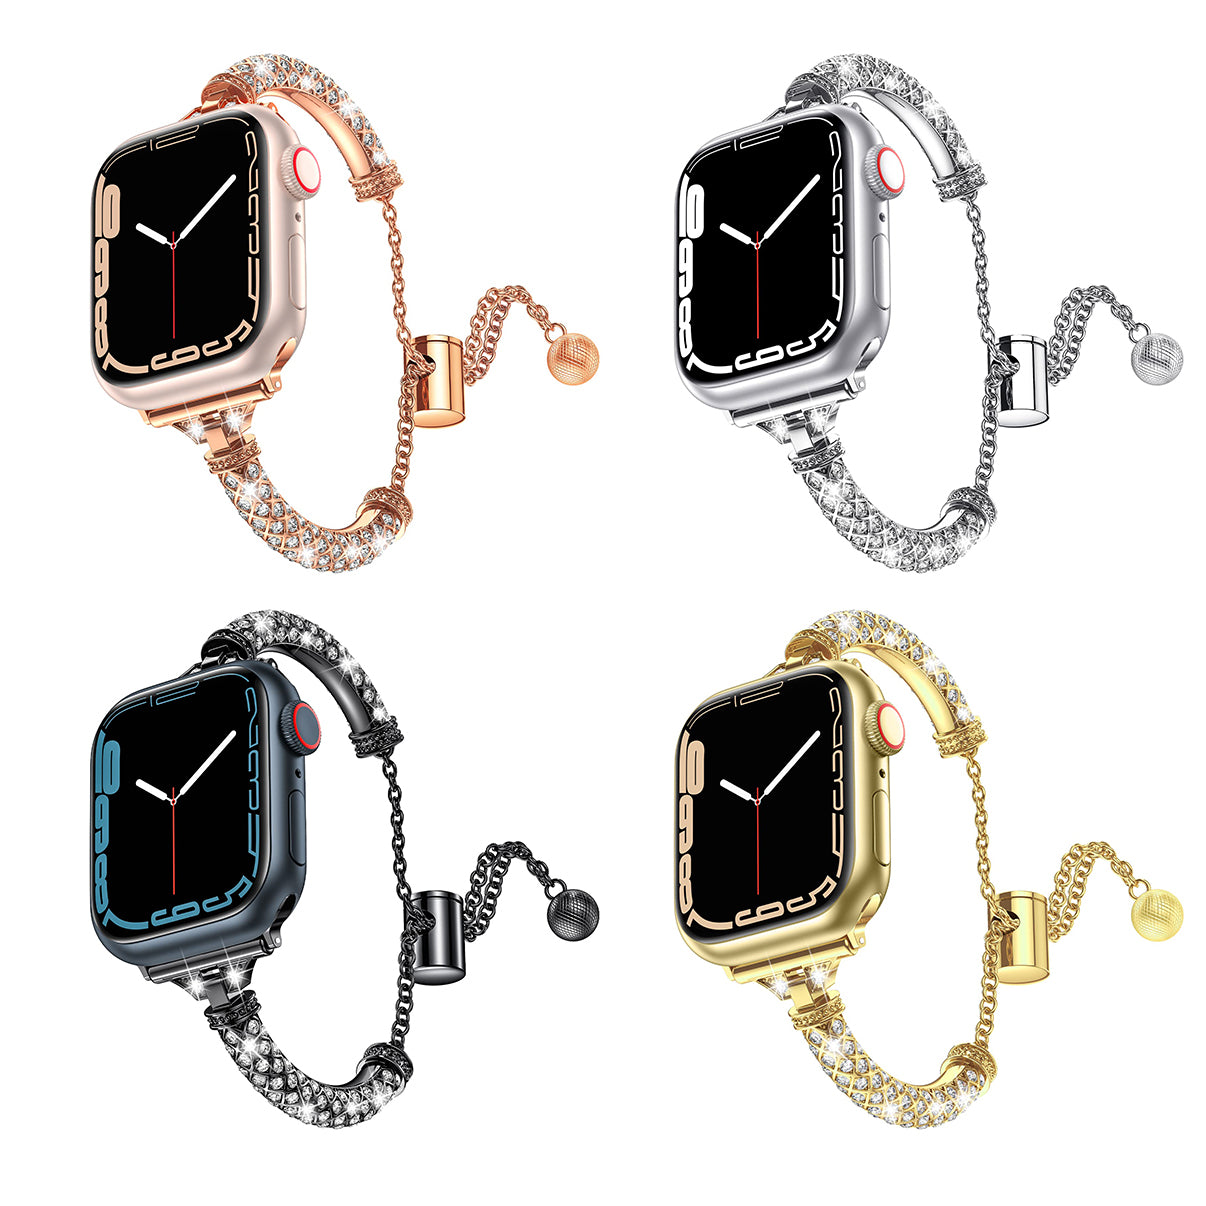 Sparkling Rhinestone Jewelry Bracelet iWatch Bands for Apple Watch All Series